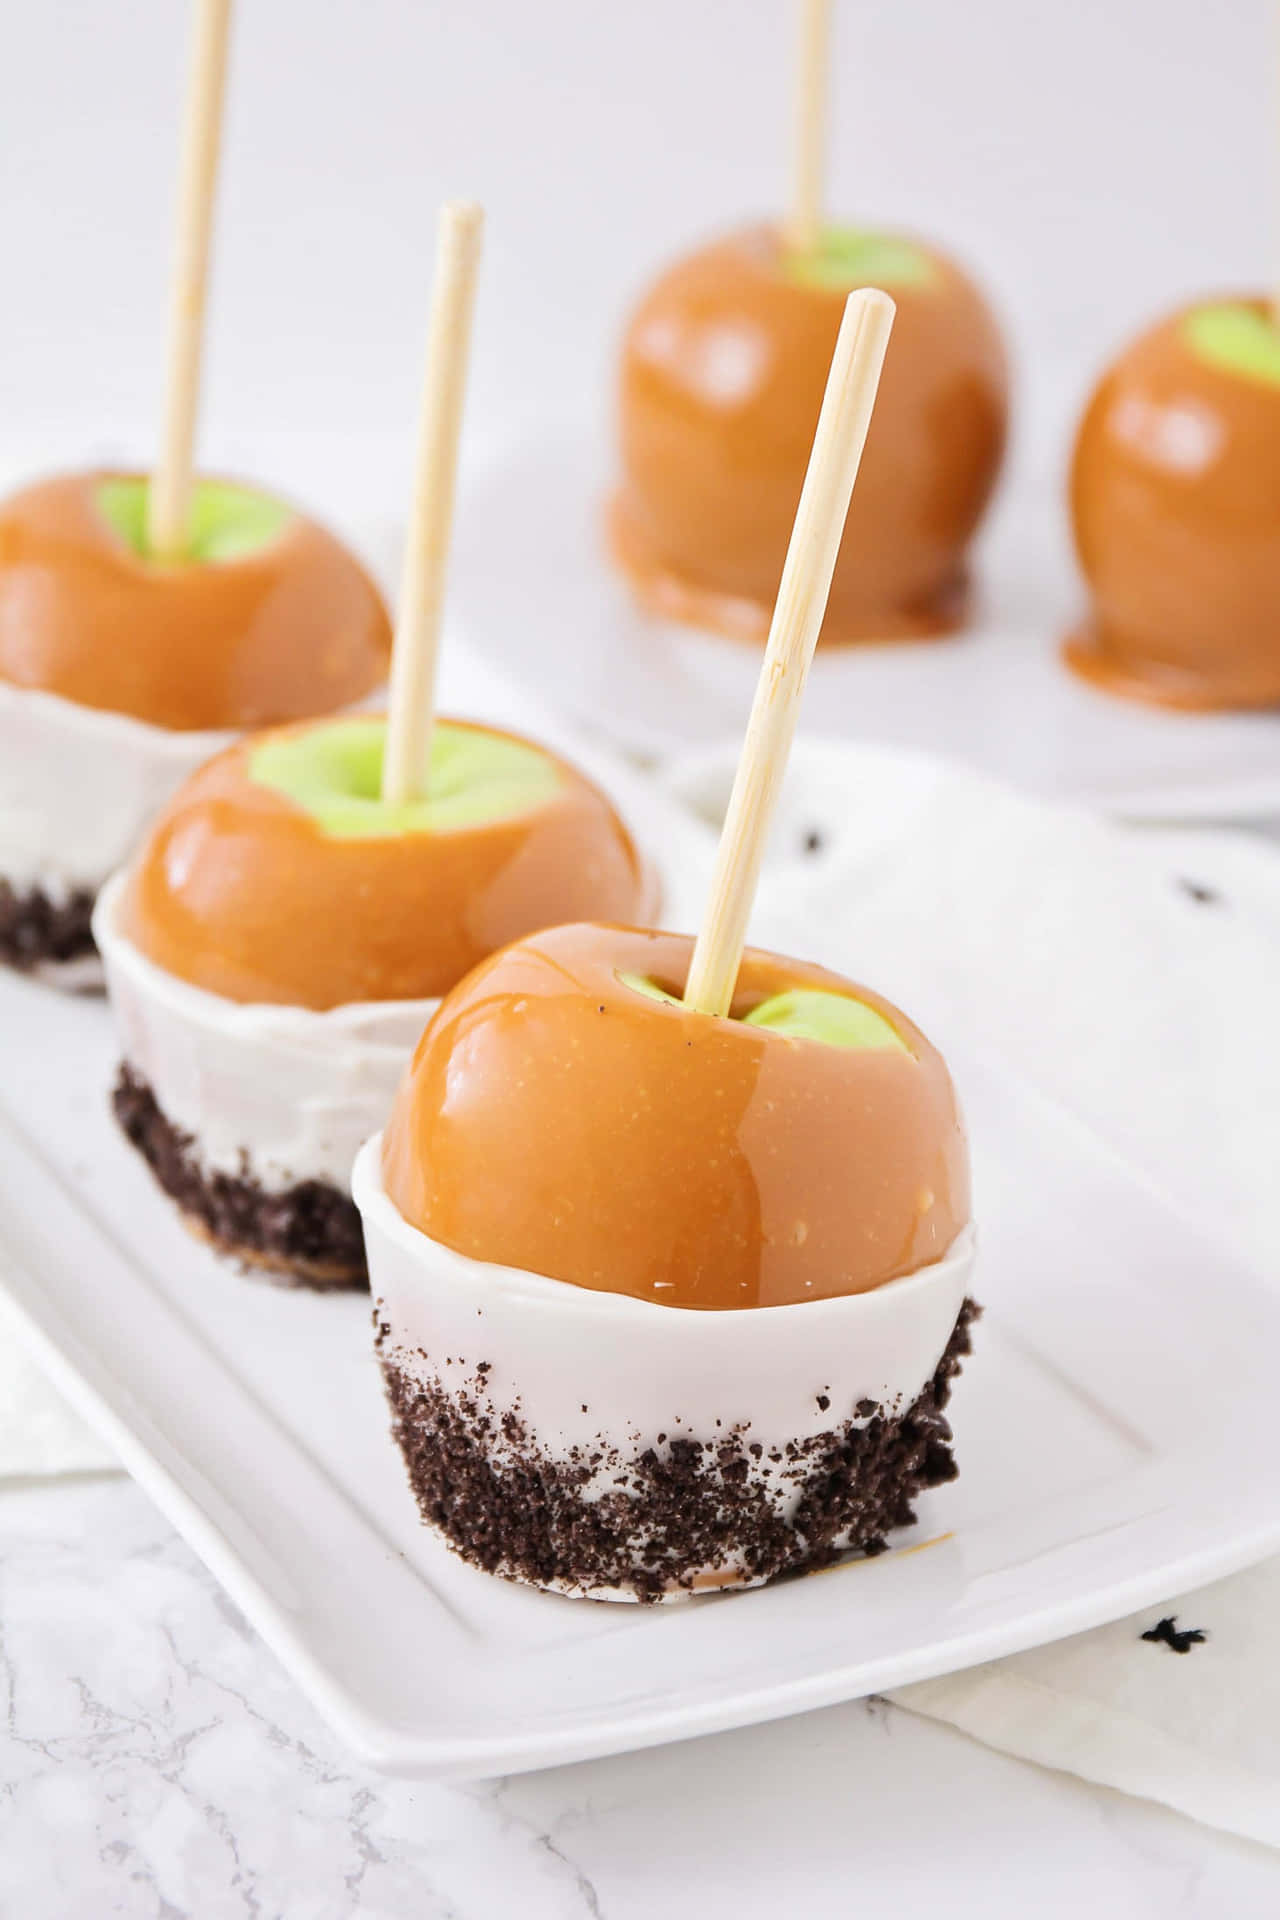 Caption: Delicious Caramel Apples on Rustic Wooden Table Wallpaper